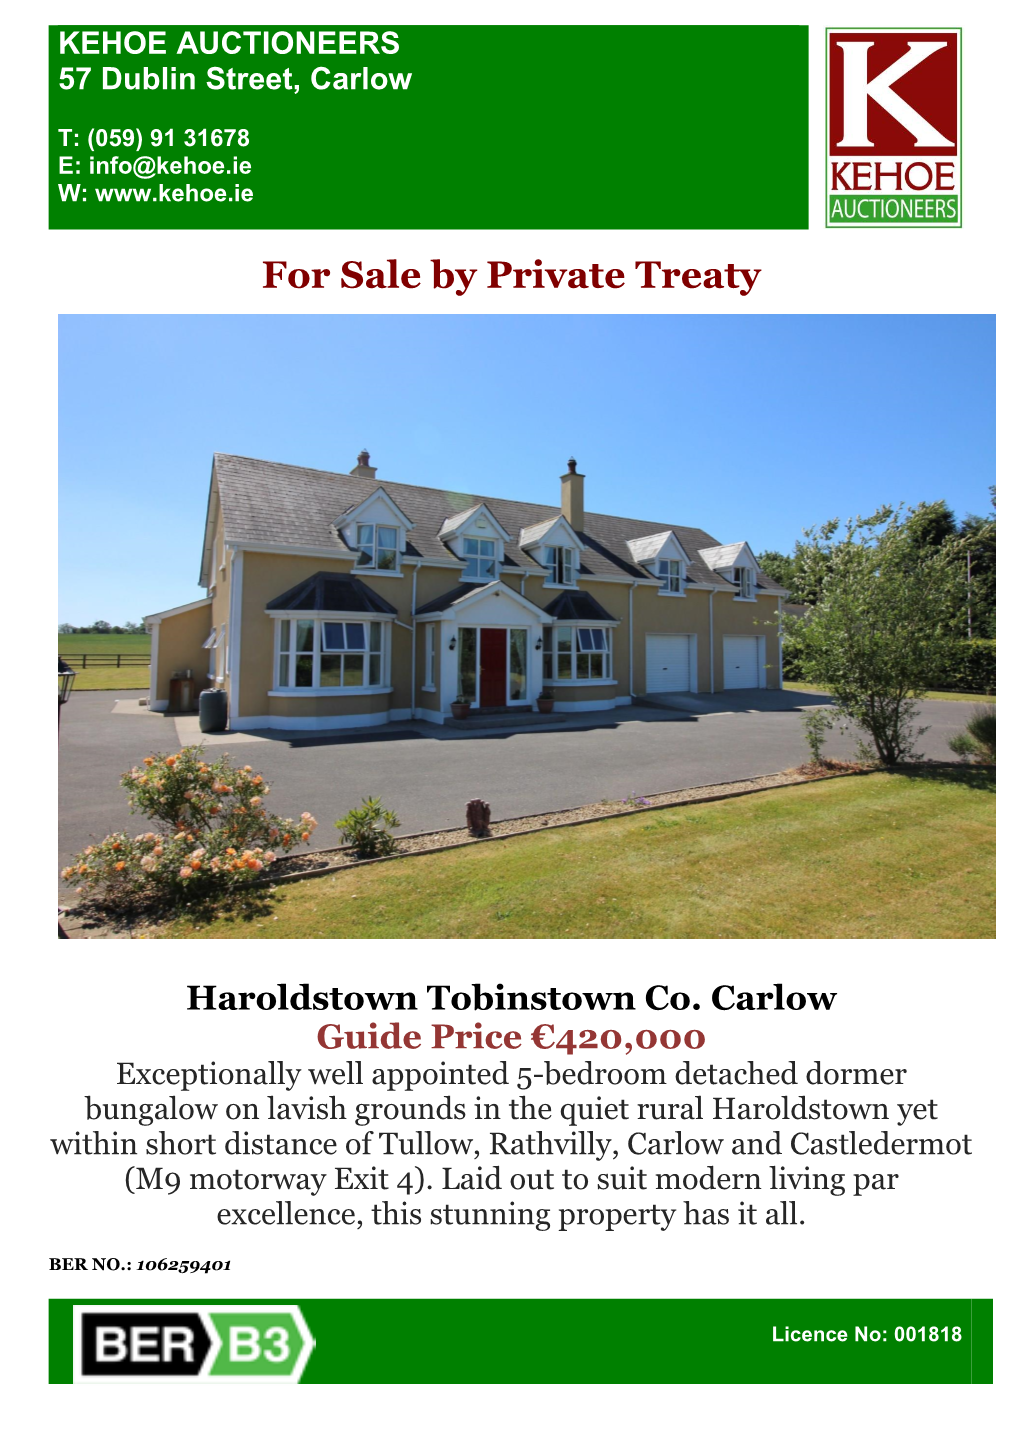 For Sale by Private Treaty